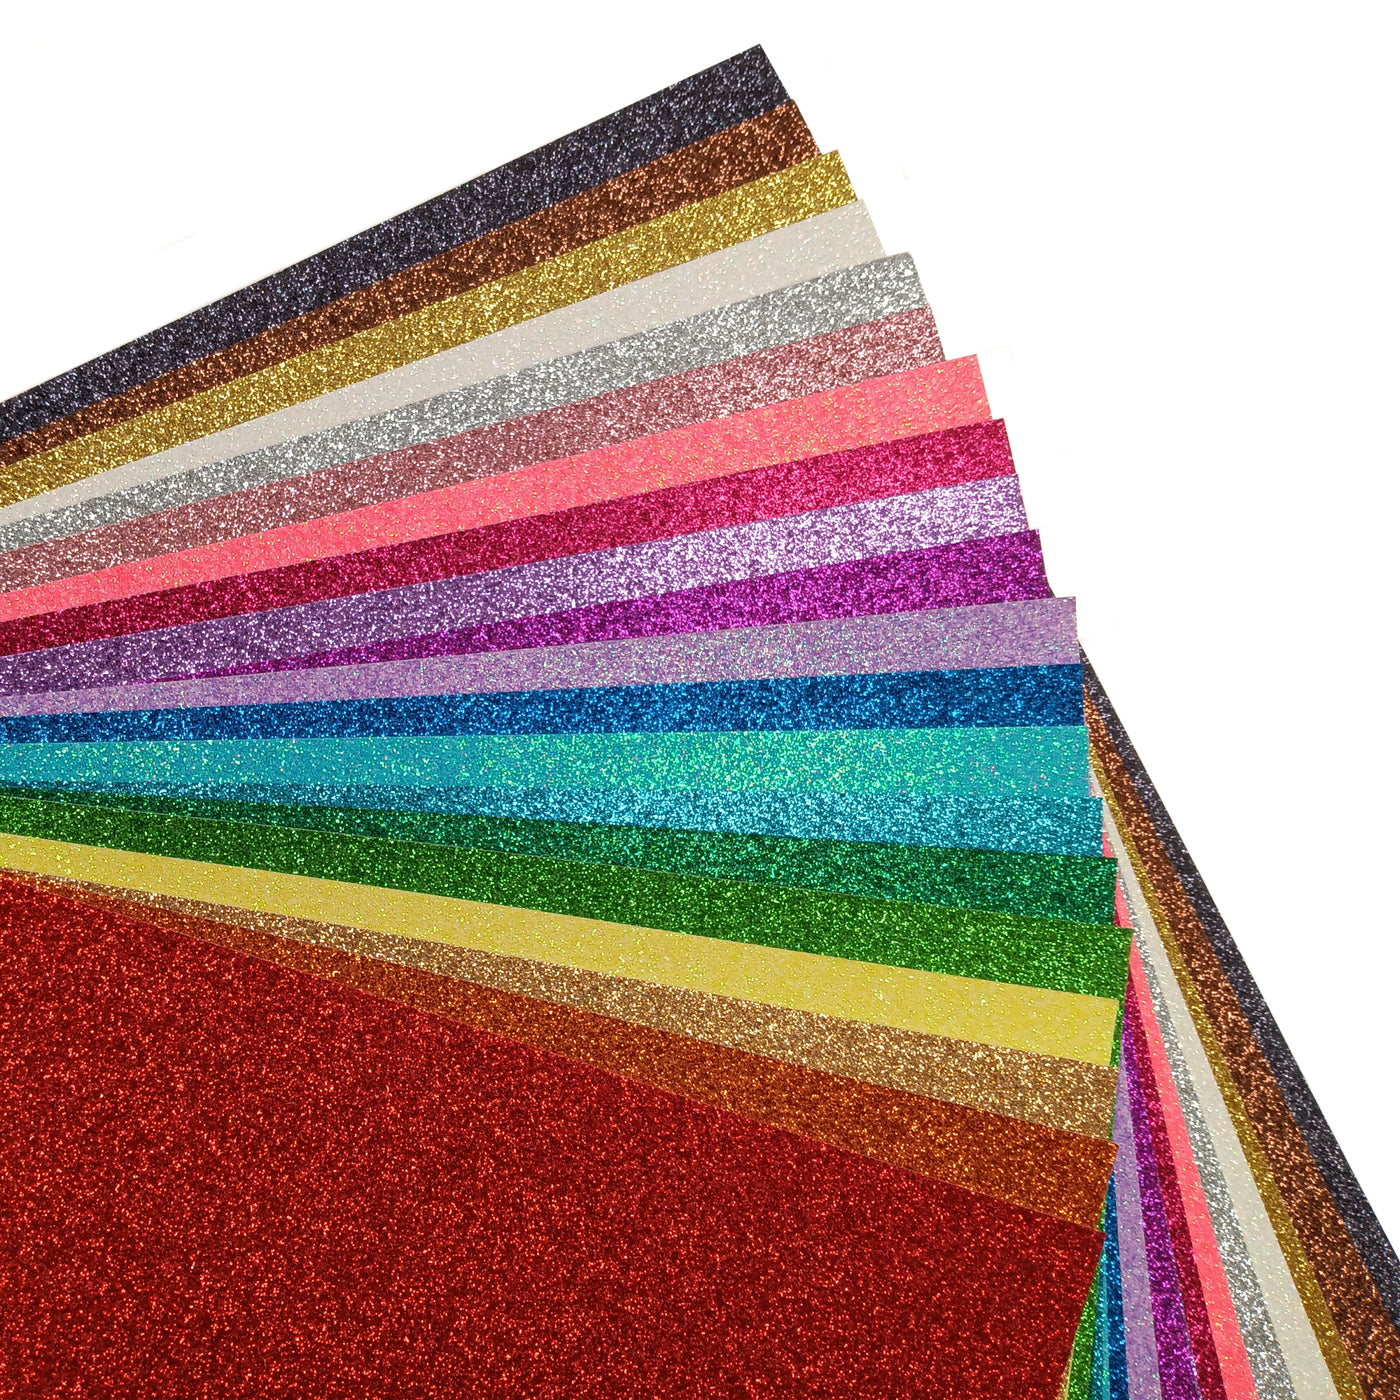 Assortment Pack includes all 20 colors of core'dinations Glitter Silk cardstock